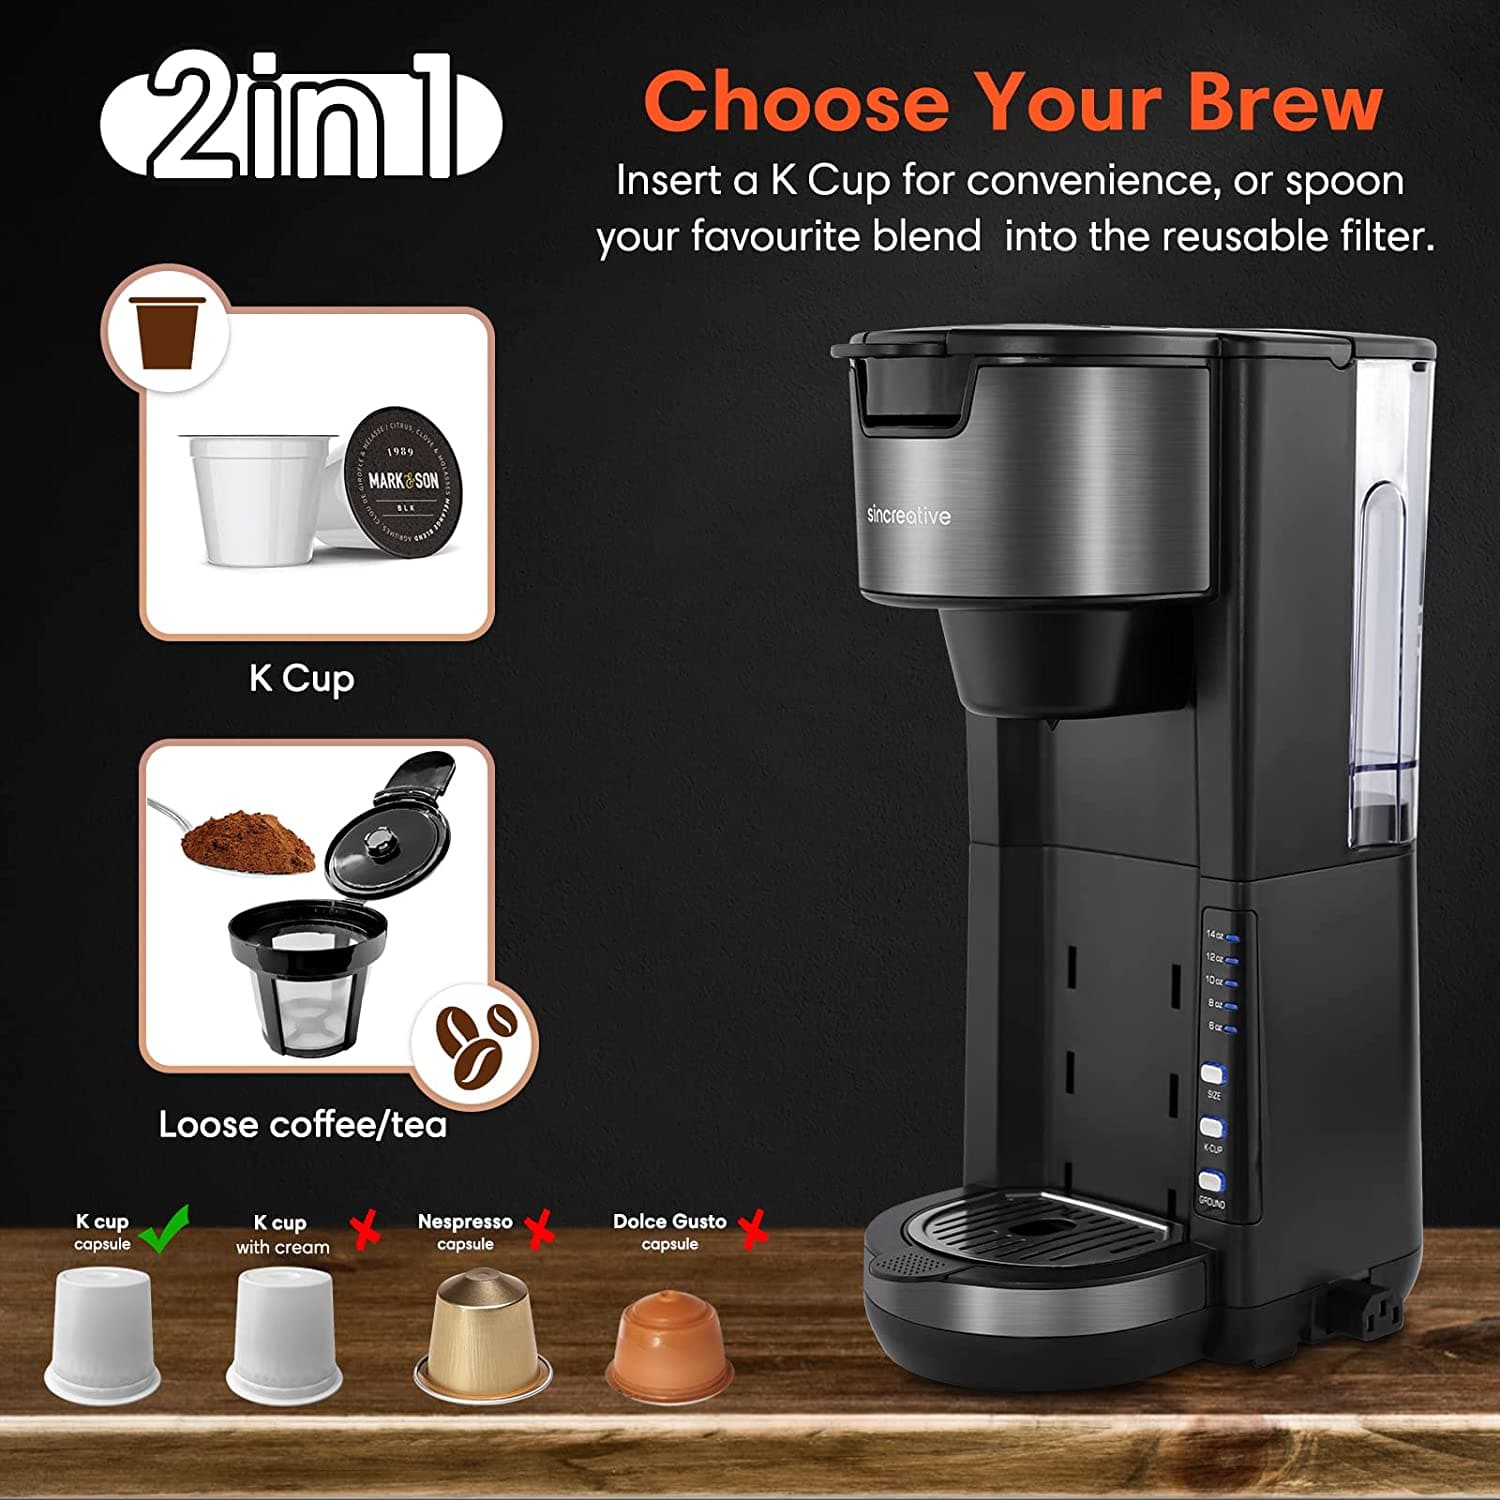 Our slim single-serve coffee maker doesn't skimp on taste! Get all the rich coffee flavor you expect, in an ultra-sleek design. Brew your own coffee or tea by filling the reusable filter or pop a K-Cup capsule into the chamber. Delicious foam and creamy milk is also at your fingertips with the handy frothing tools. This easy-to-use coffee maker will simplify your coffee routine. It's the small machine that opens up the whole world of Sin coffee.